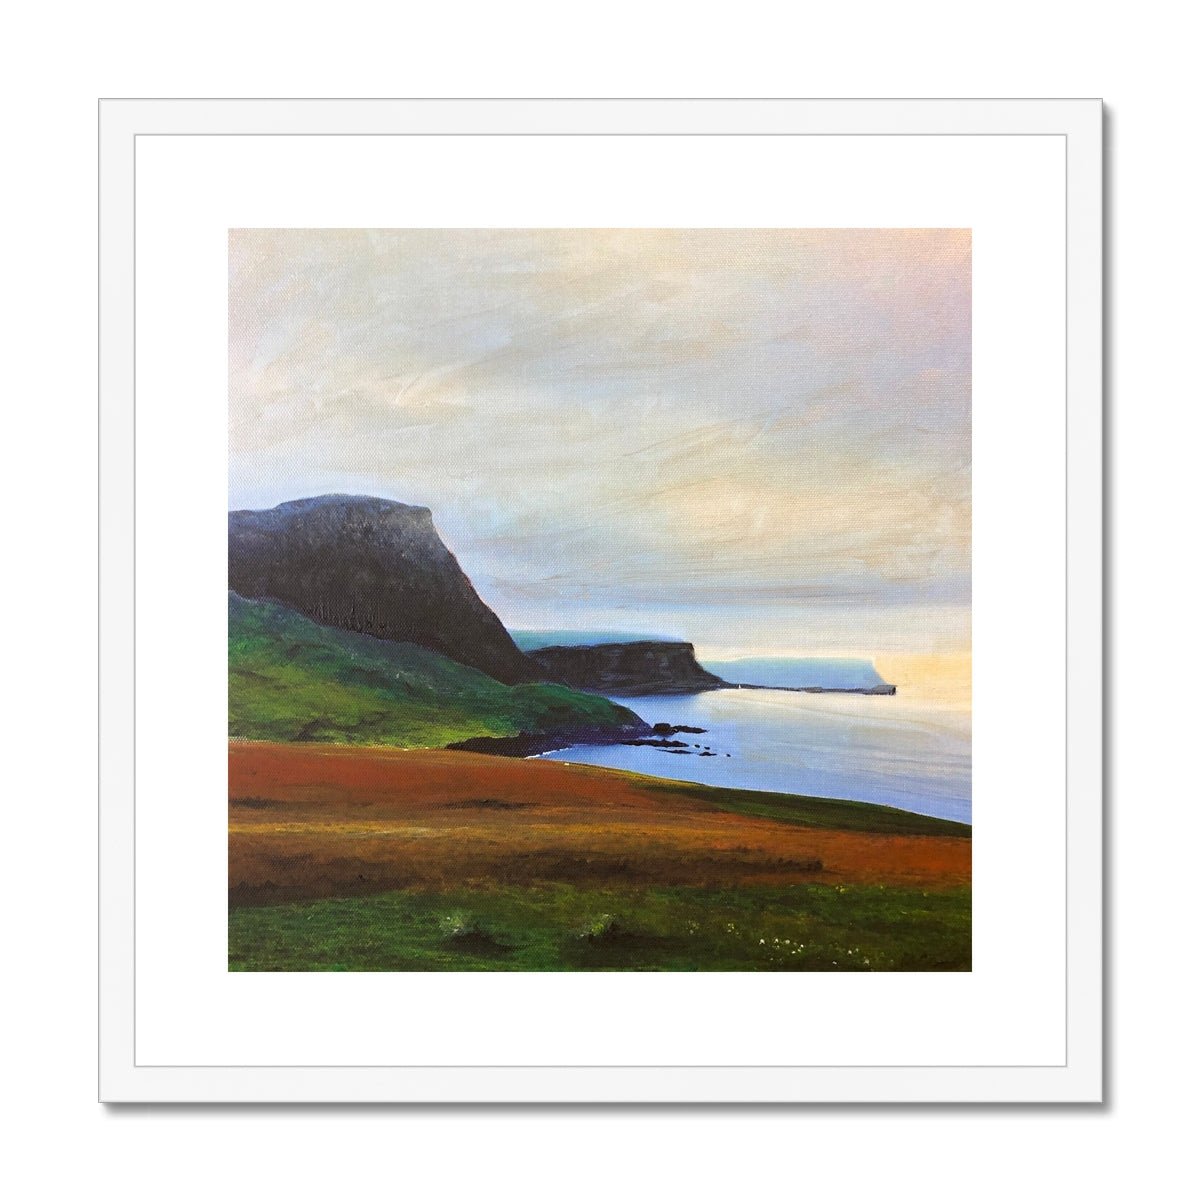 Neist Point Cliffs Skye Painting | Framed & Mounted Prints From Scotland-Framed & Mounted Prints-Skye Art Gallery-20"x20"-White Frame-Paintings, Prints, Homeware, Art Gifts From Scotland By Scottish Artist Kevin Hunter